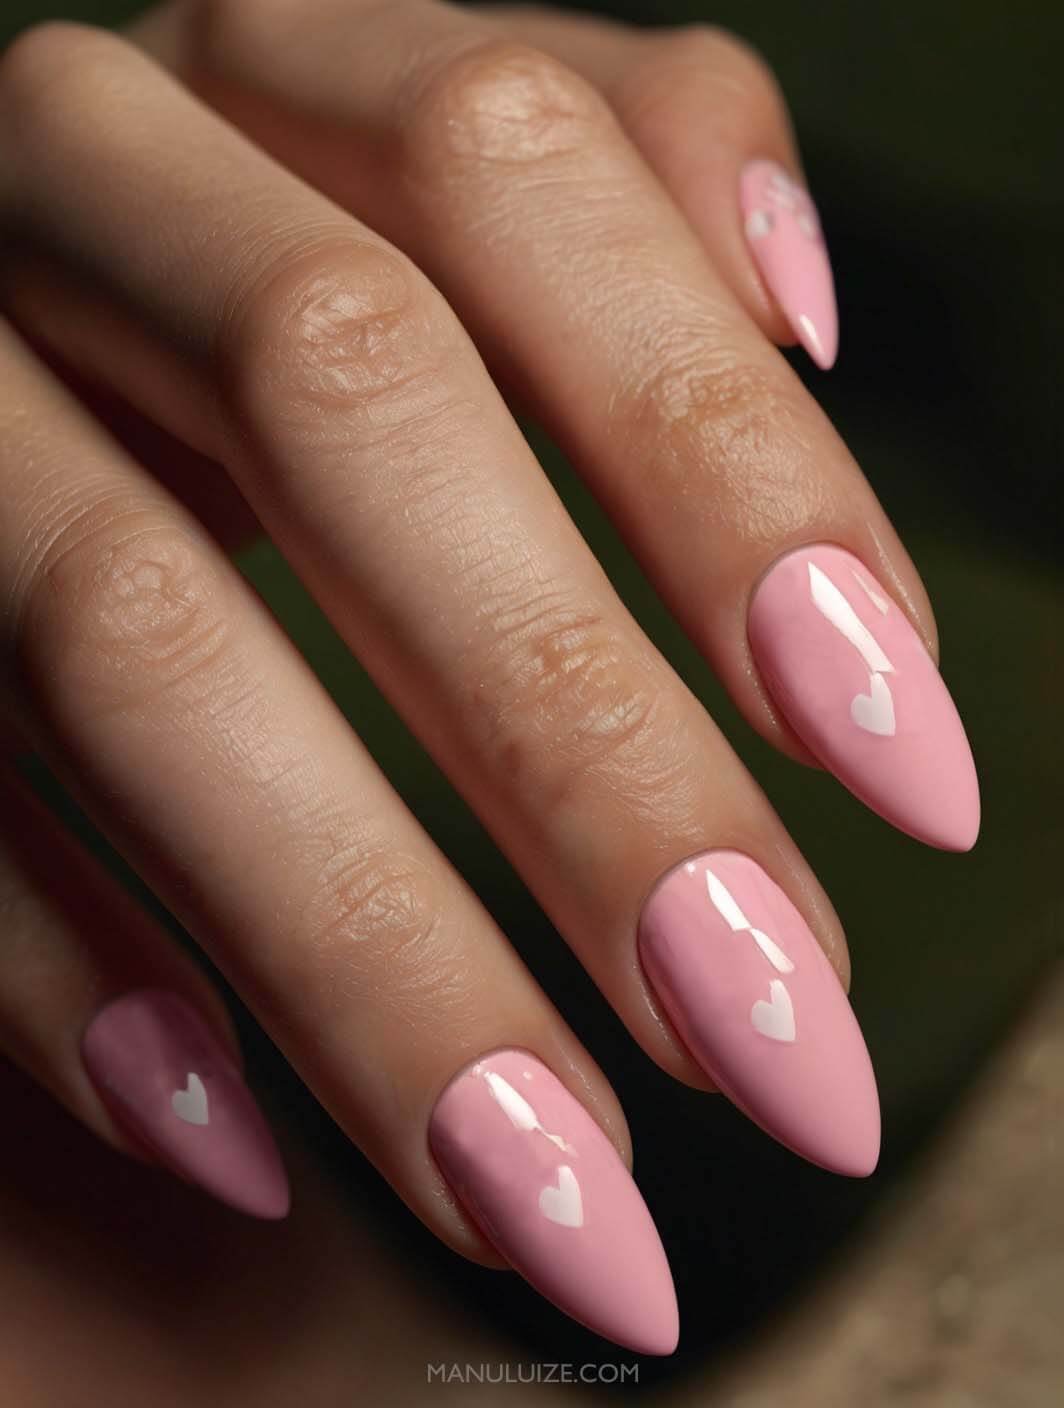 Baby pink nails white hearts